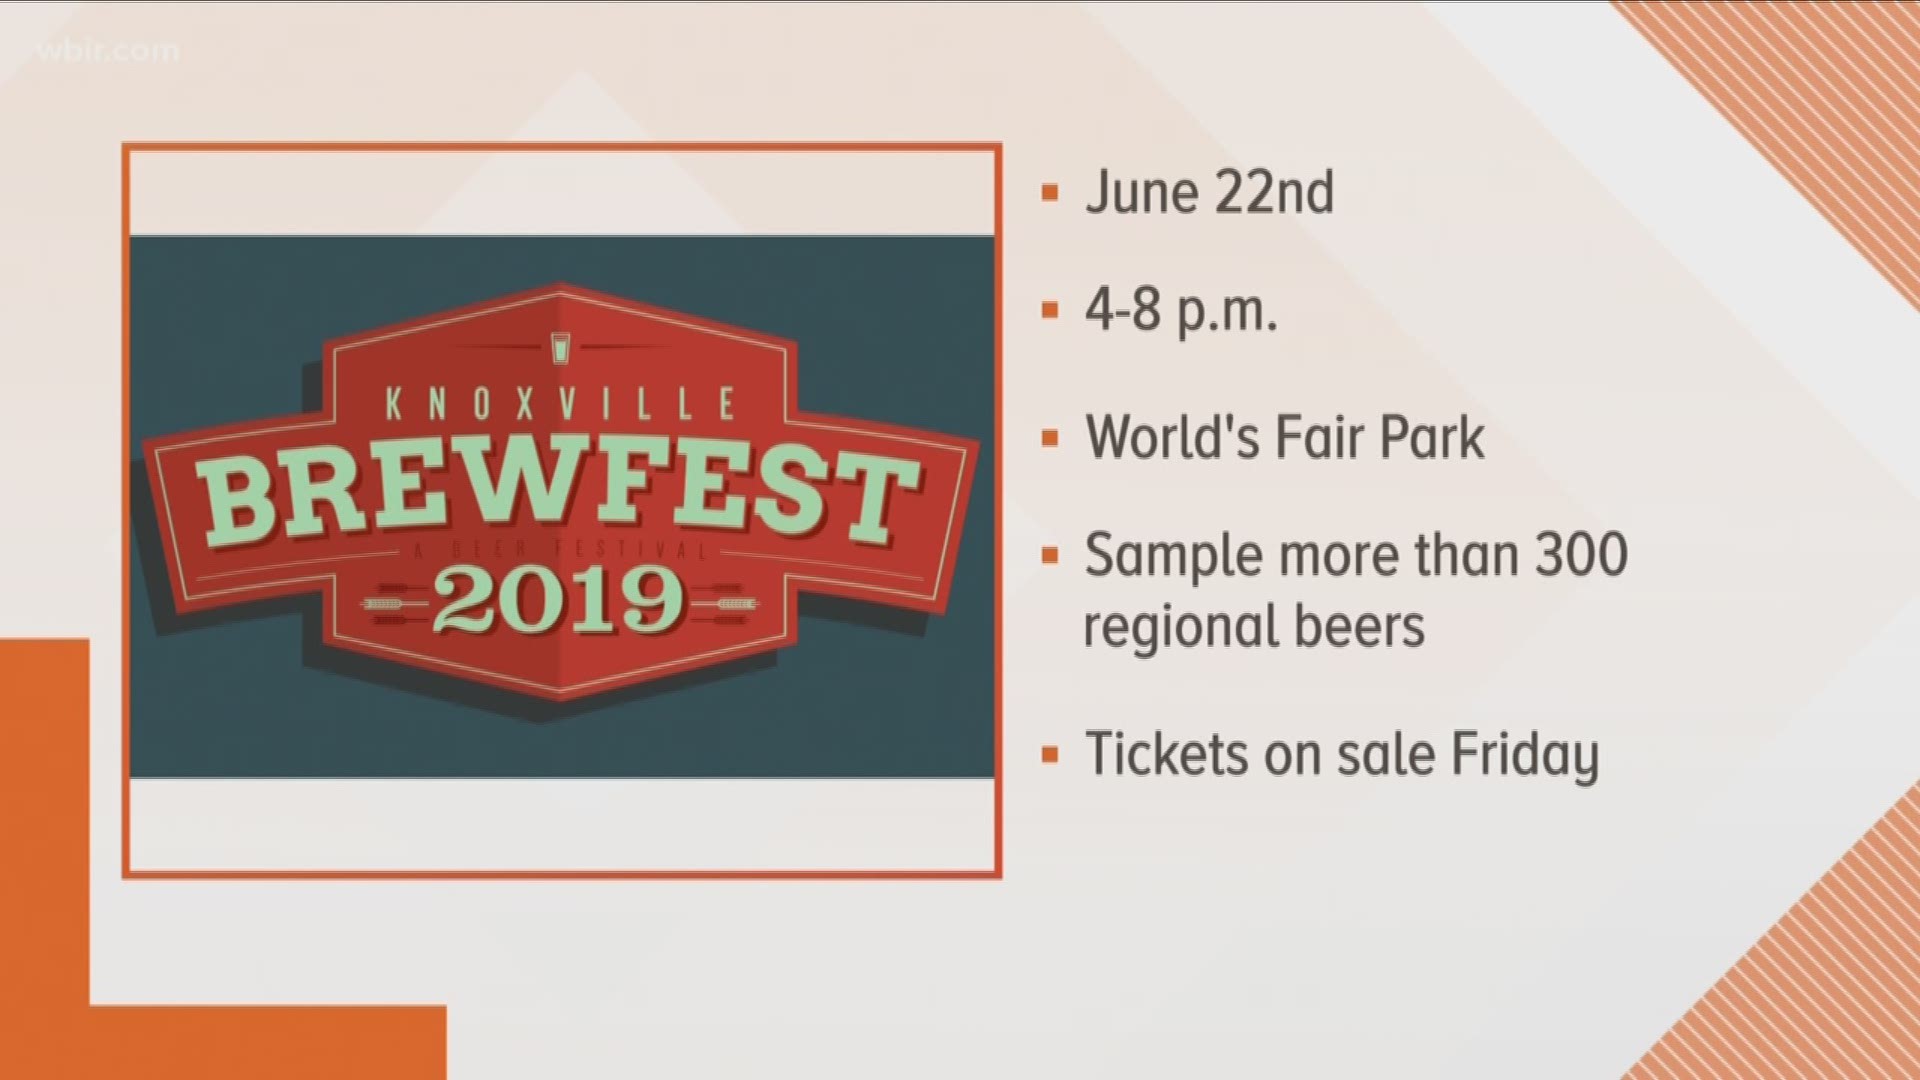 Knoxville Brewfest announced it'll be back on June 22nd.